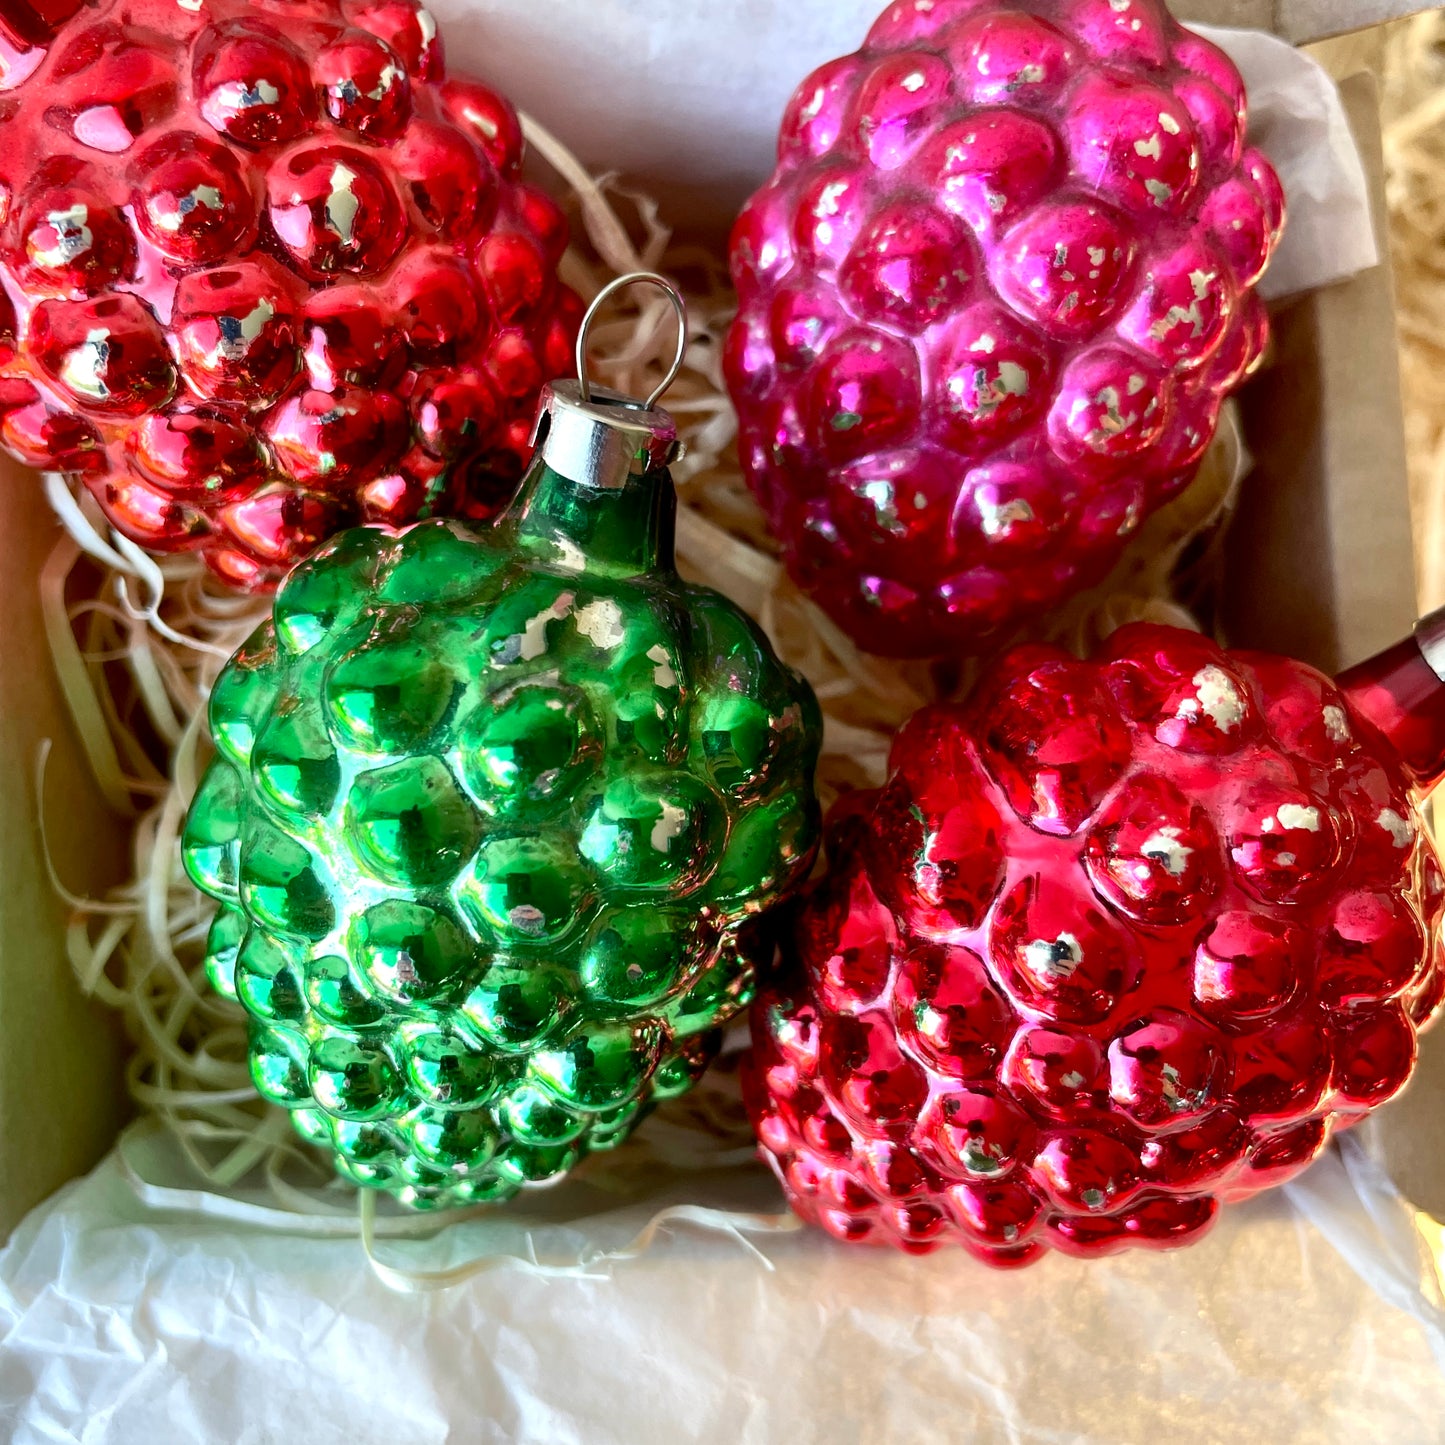 Four early berry shaped baubles